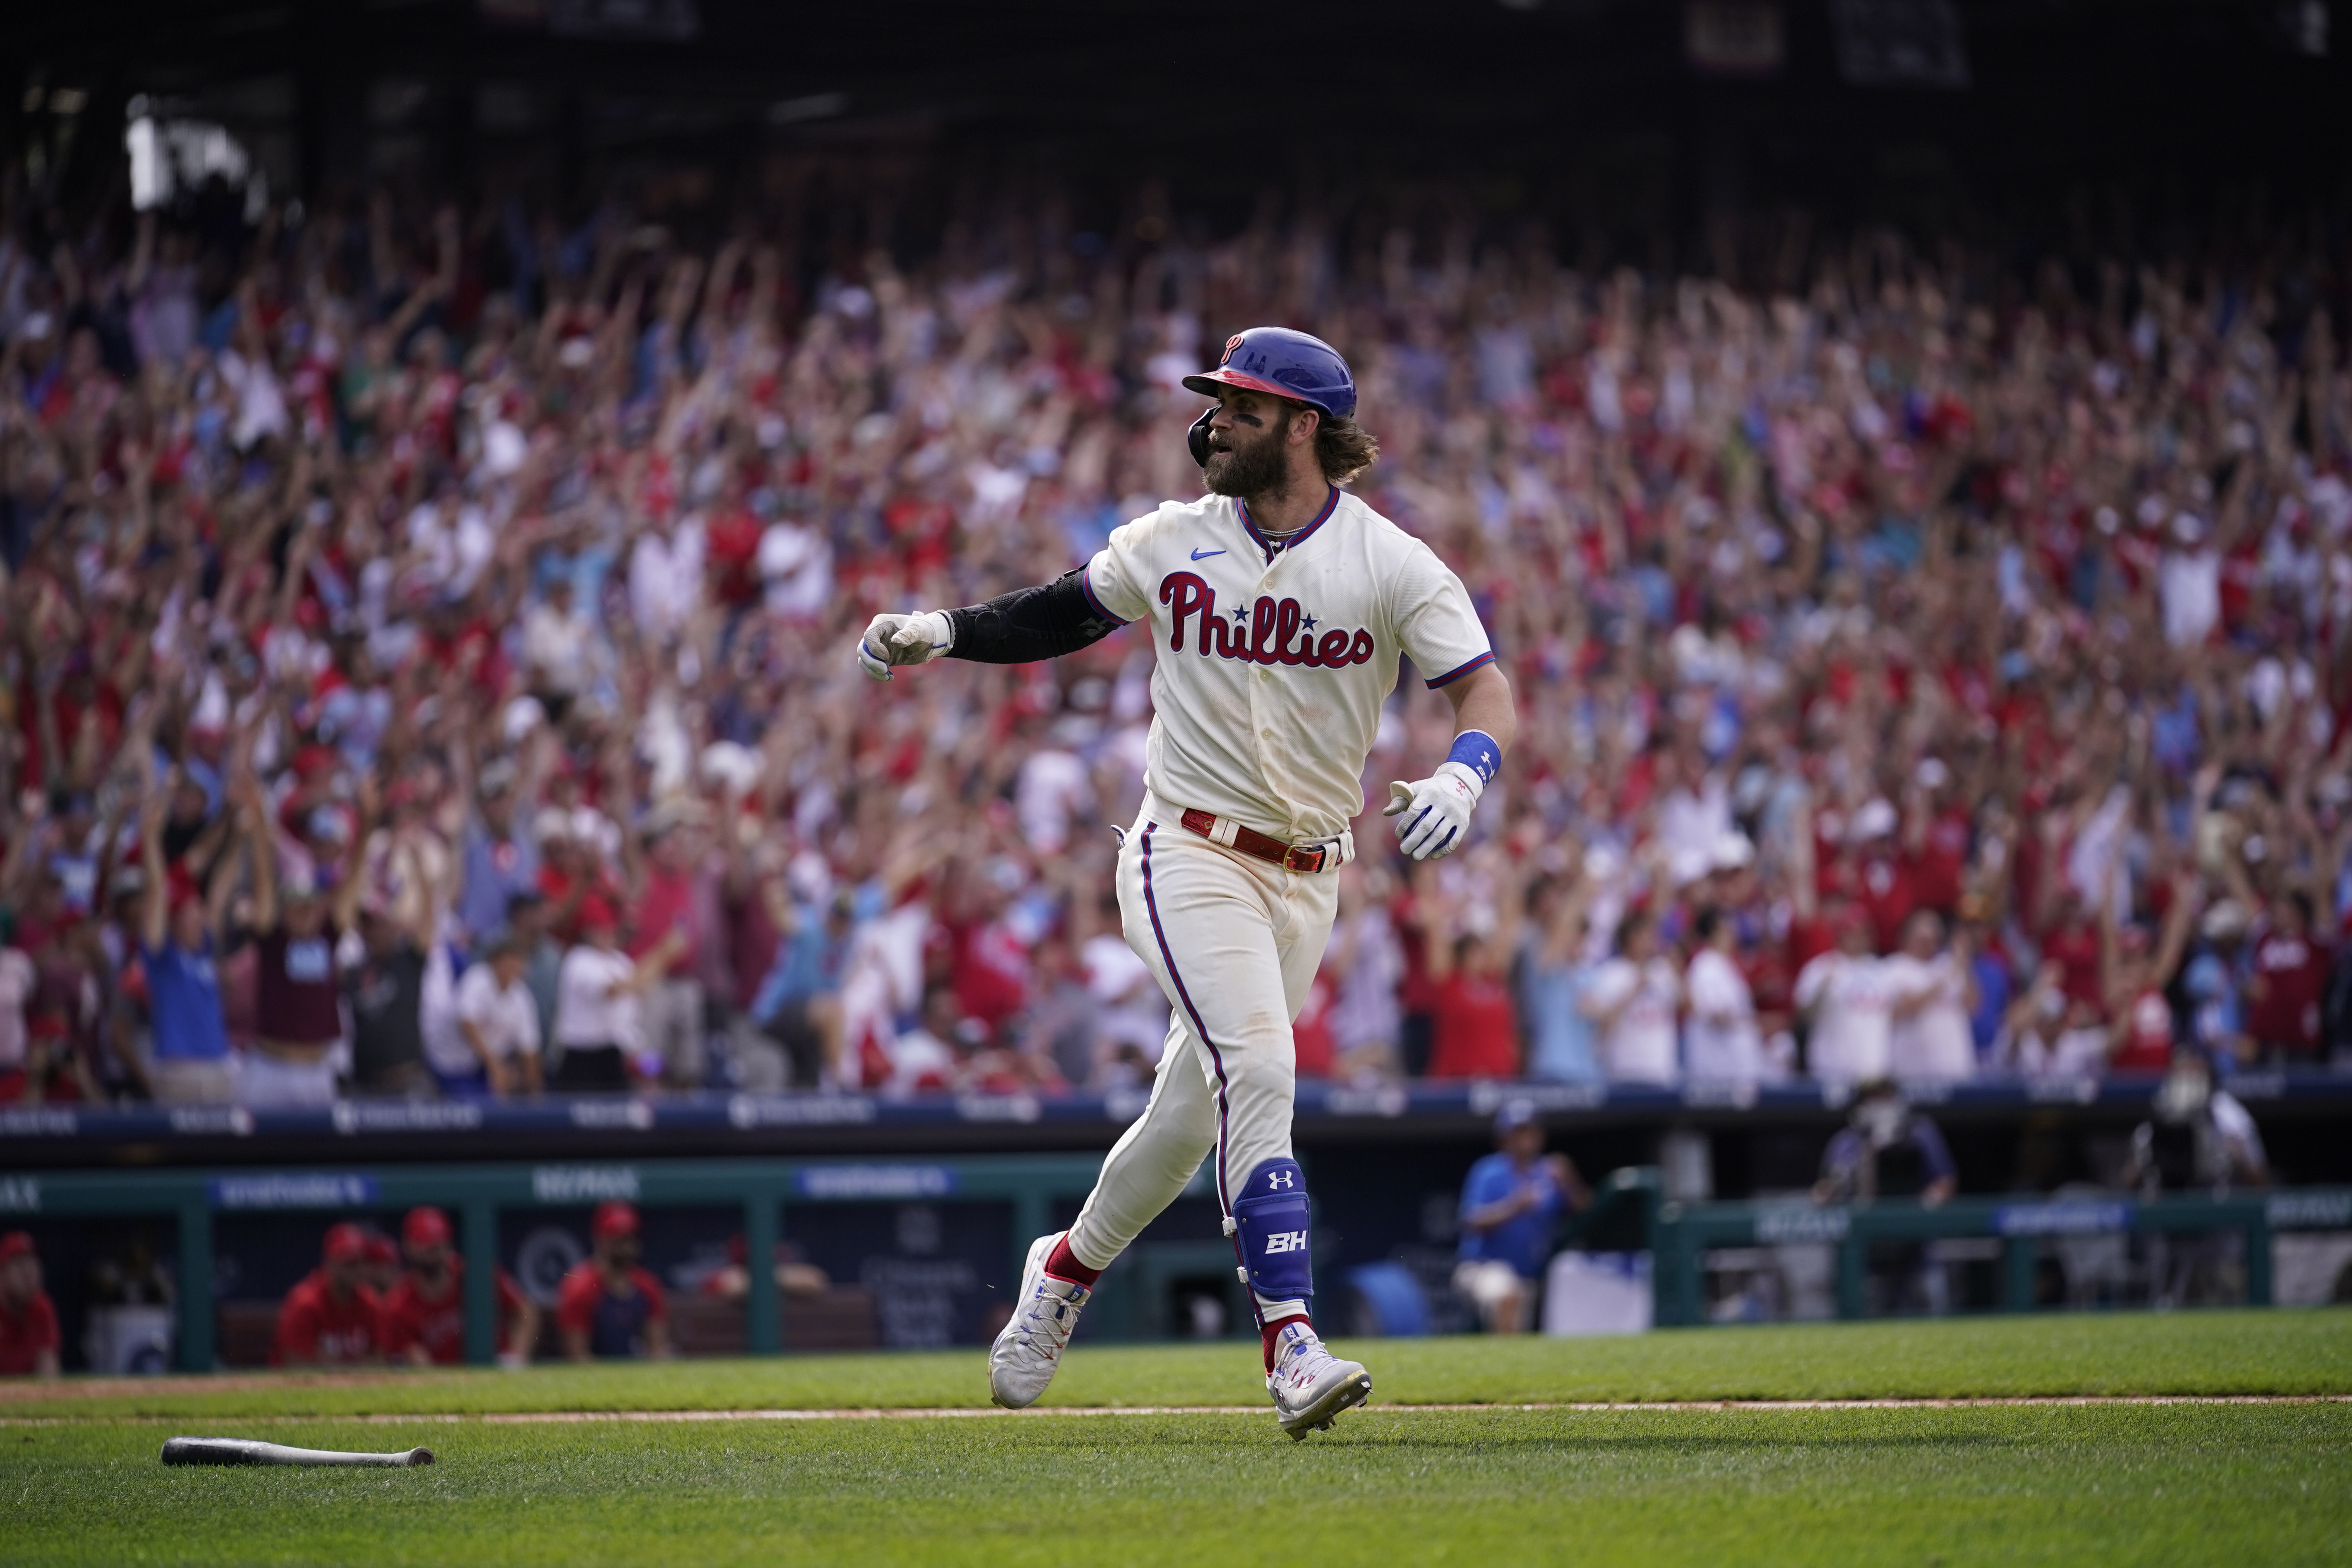 Phillies Nation on X: One month ago today, Bryce Harper sent the